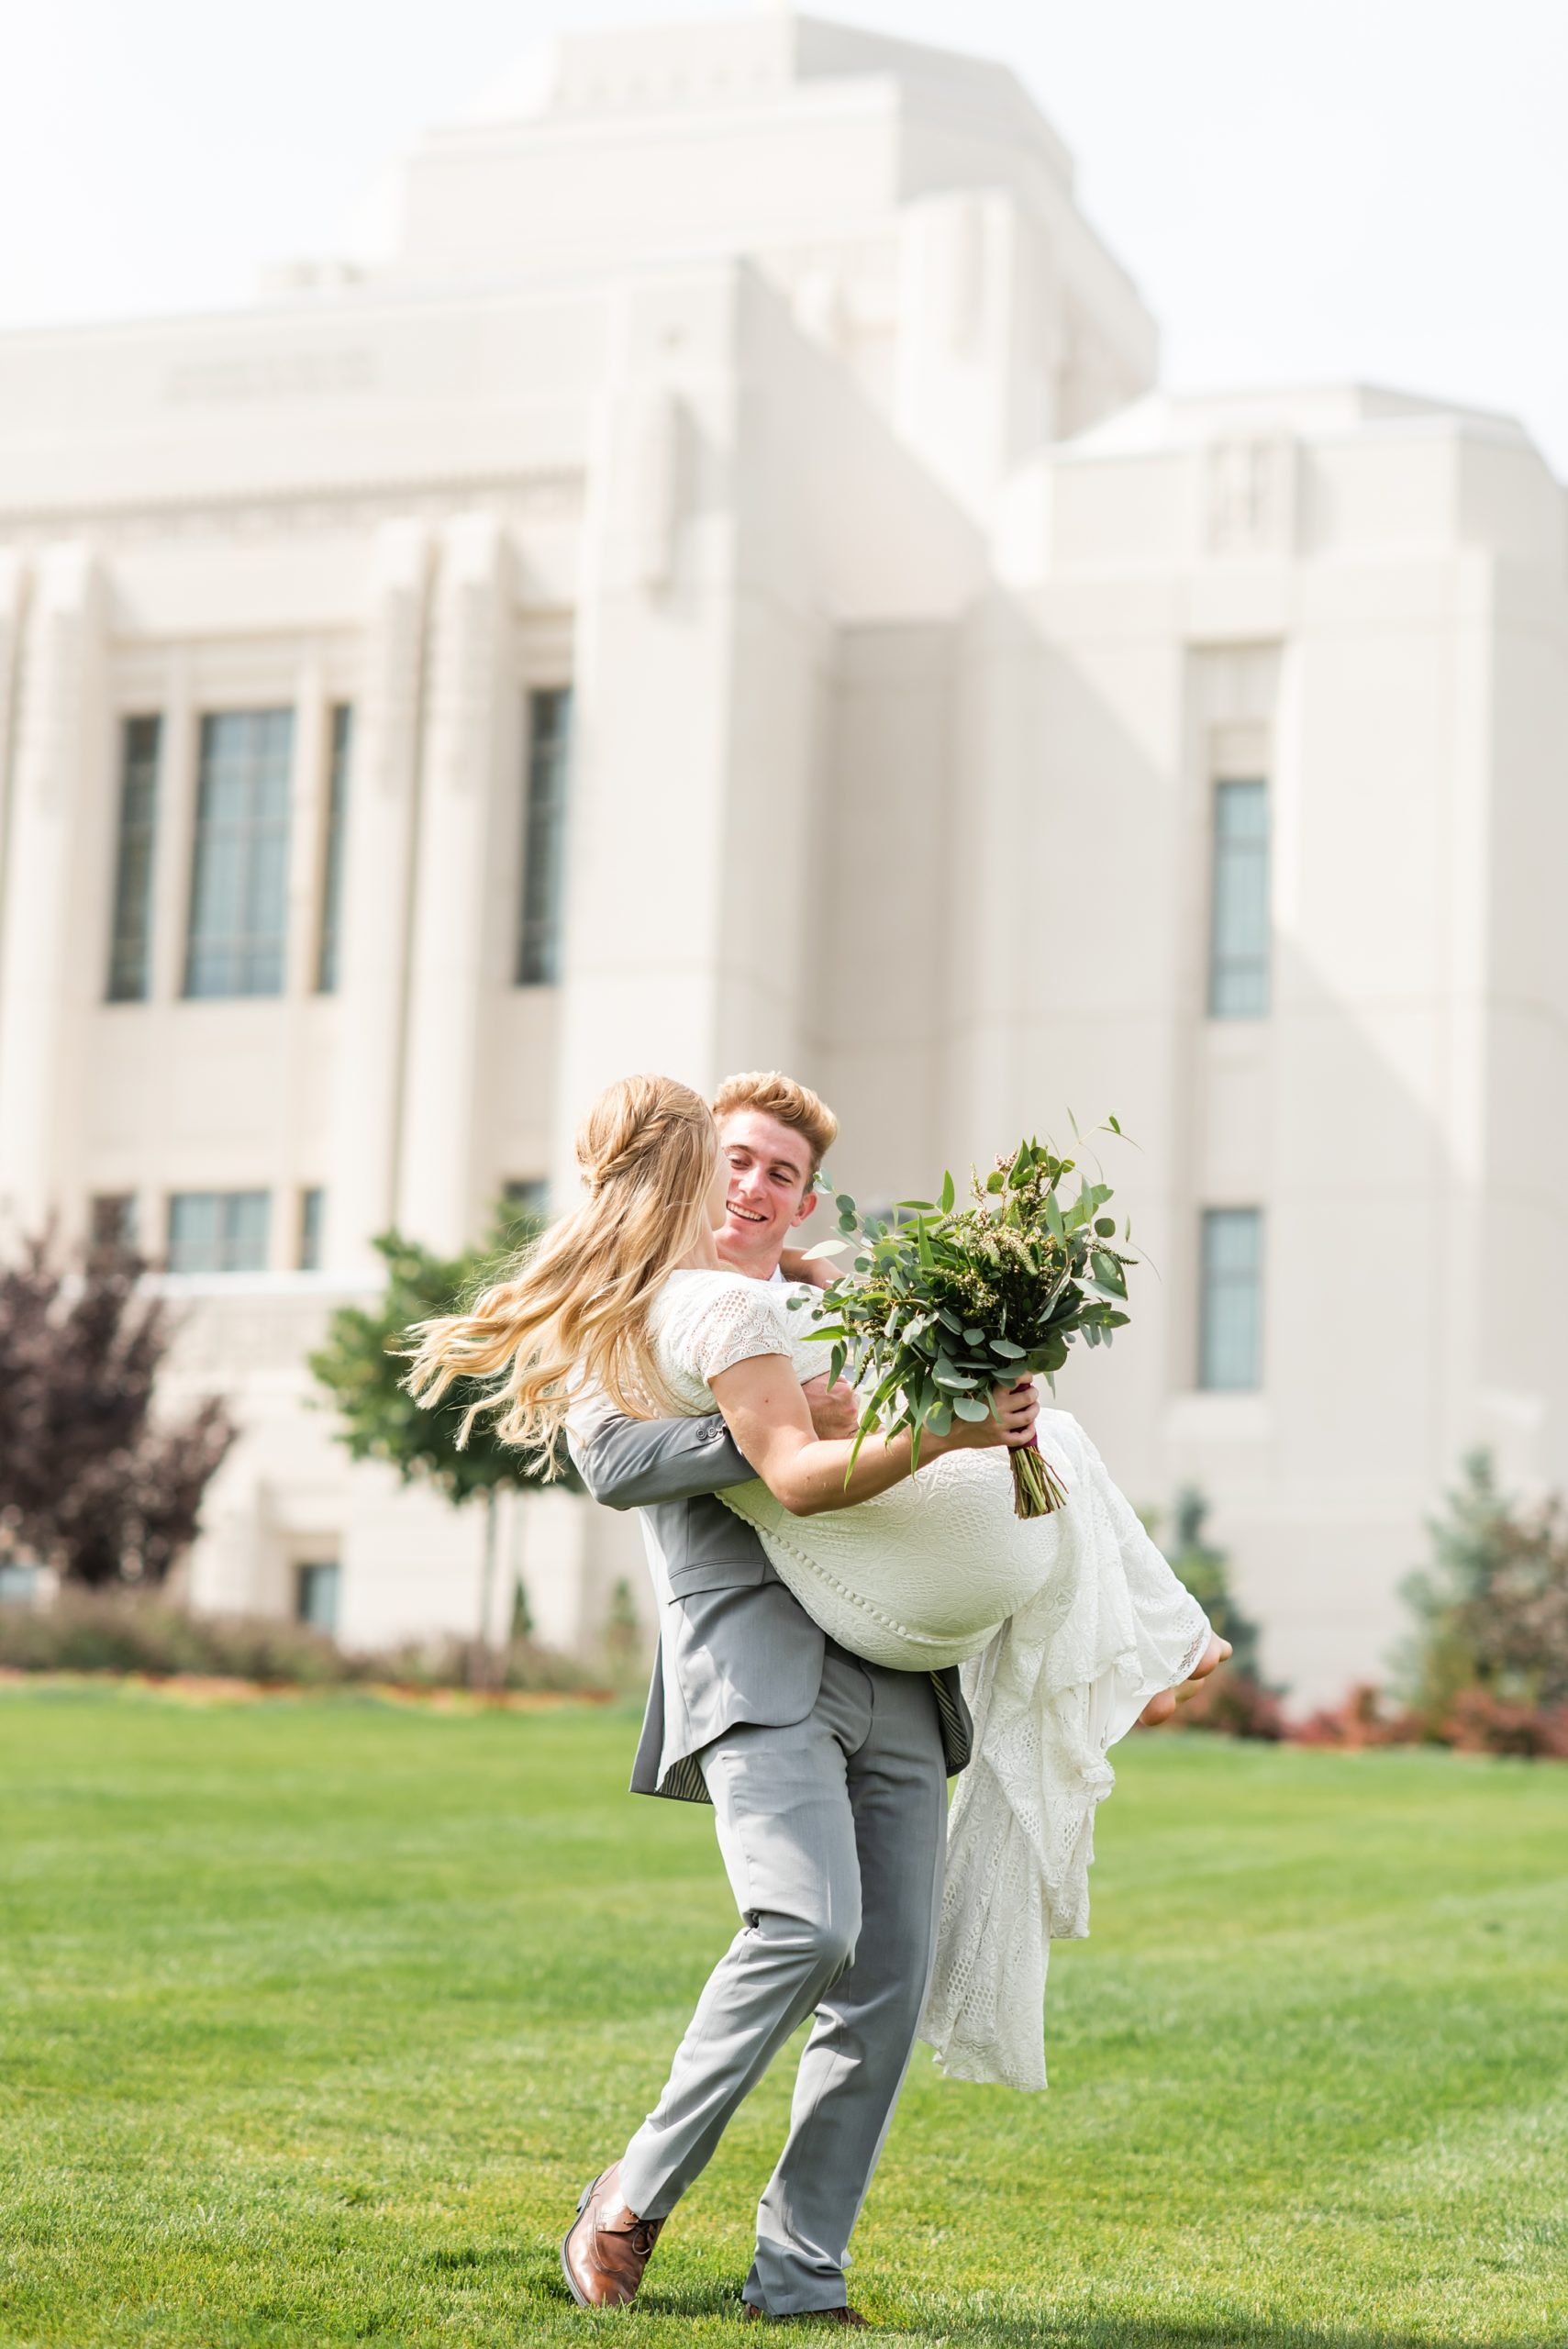 Meridian Temple Bride and Groom Pictures